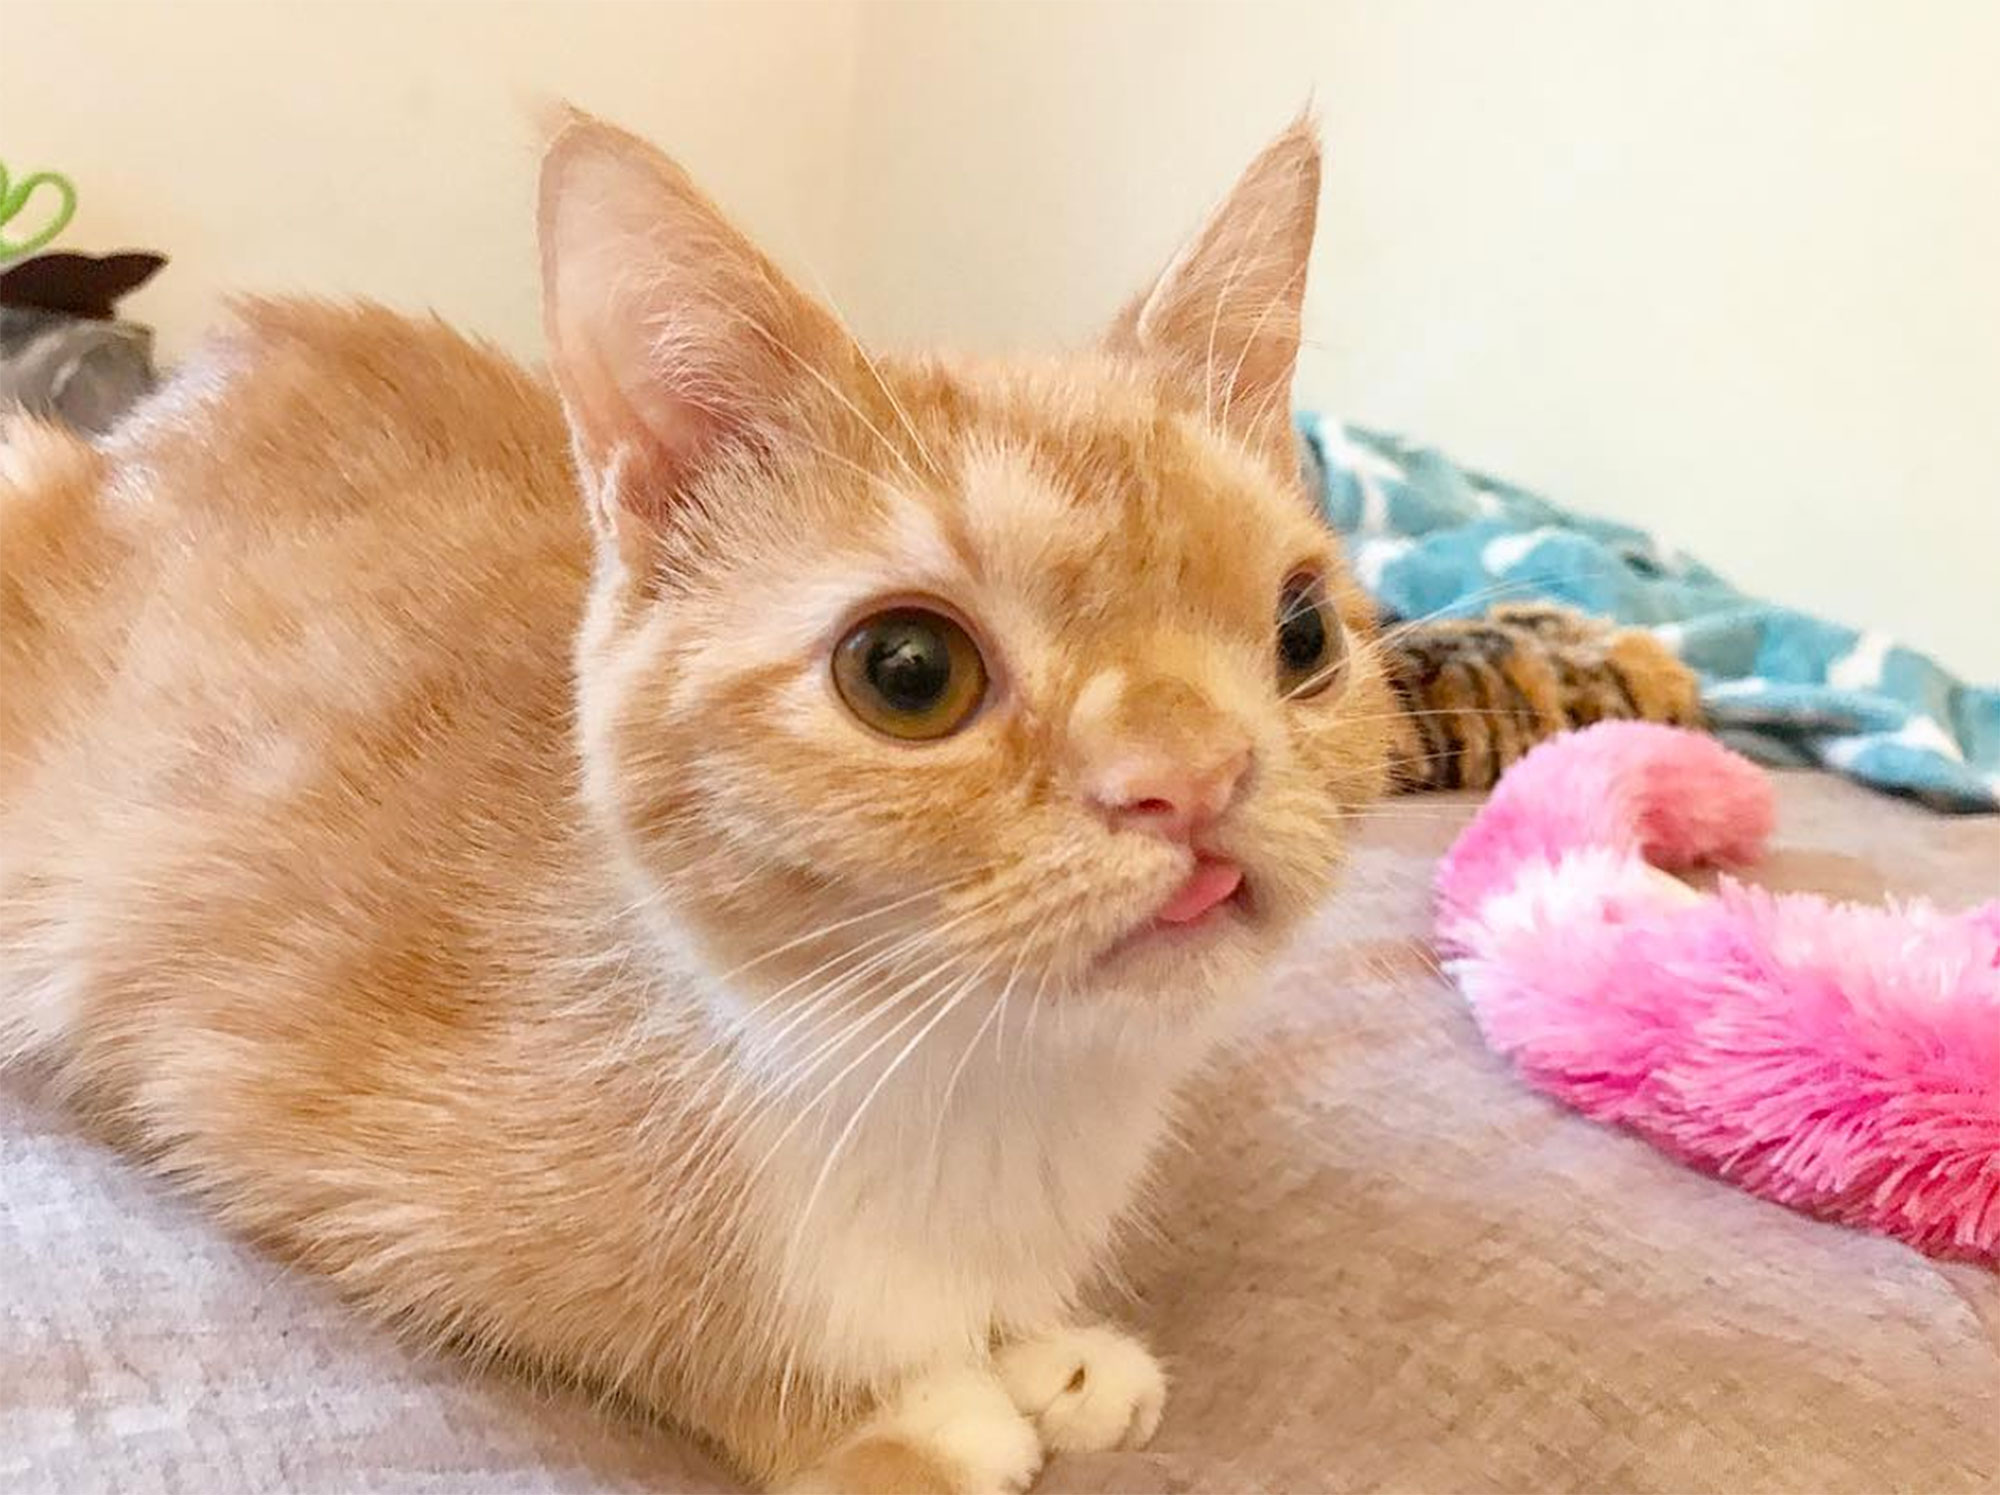 Smush the Instagram Cat with a Cleft Lip | PEOPLE.com